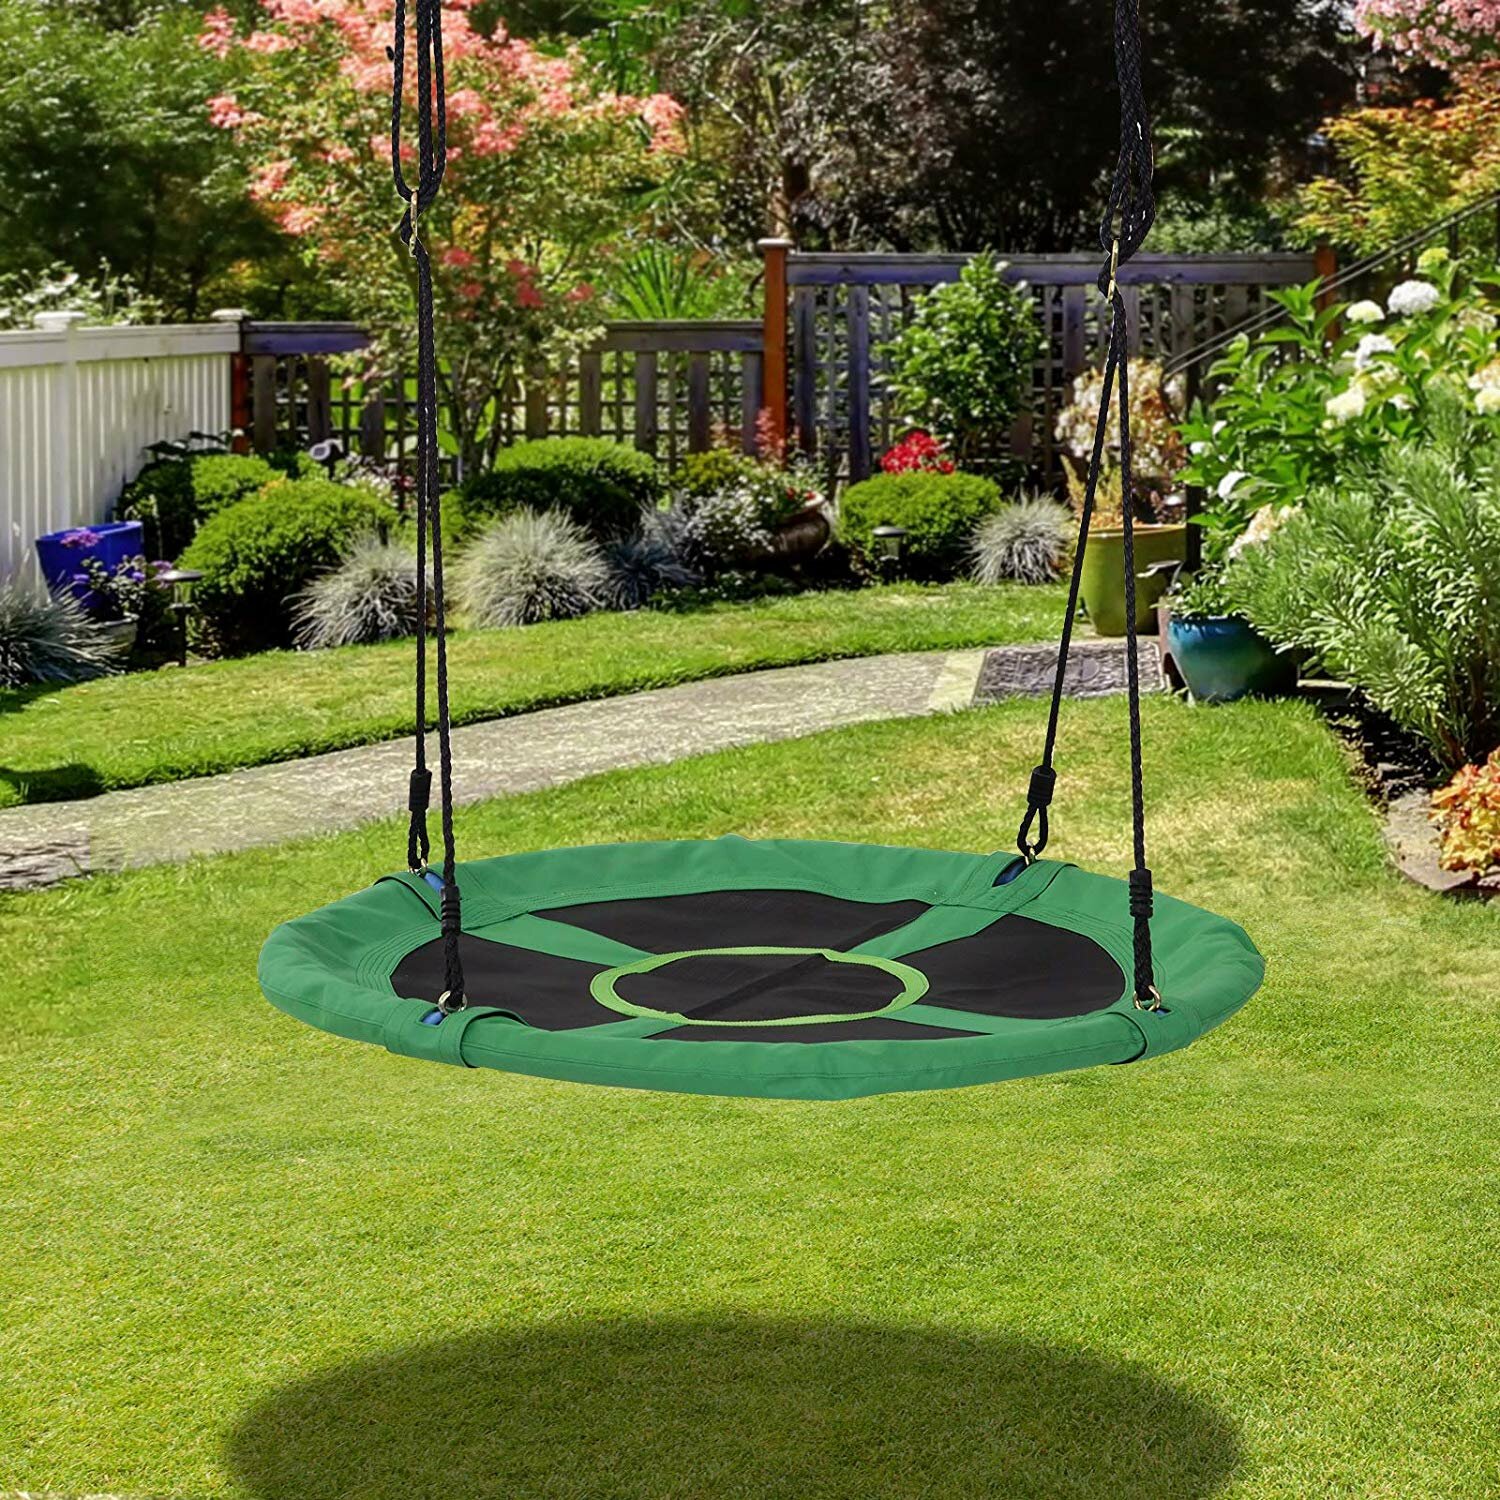 KLFGJ 40 Saucer Tree Swing Flying,660lb Multi-Strand Ropes Colorful and Safety Swing,Giant Flying Saucer Tree Swing,Adjustable Hanging Ropes,Backyard Swing Set for Kids,USA Warehouse/Faster Speeds 